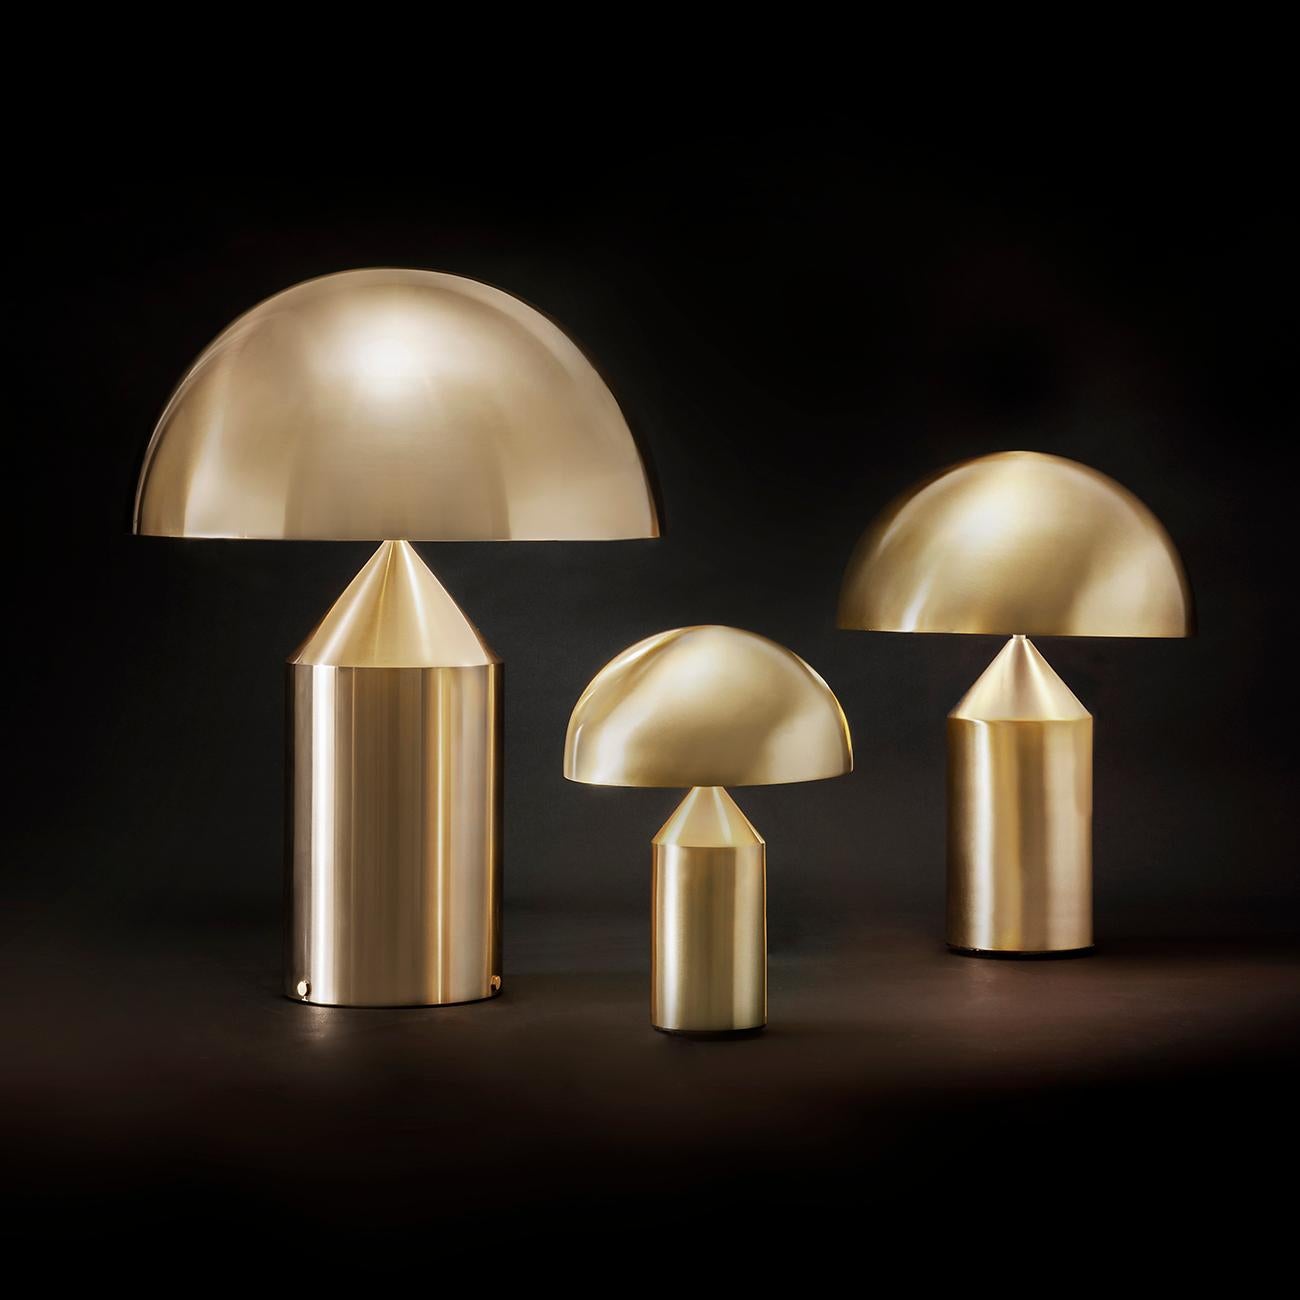 Italian Set of 'Atollo' Large and Small Gold Table Lamp Designed by Vico Magistretti